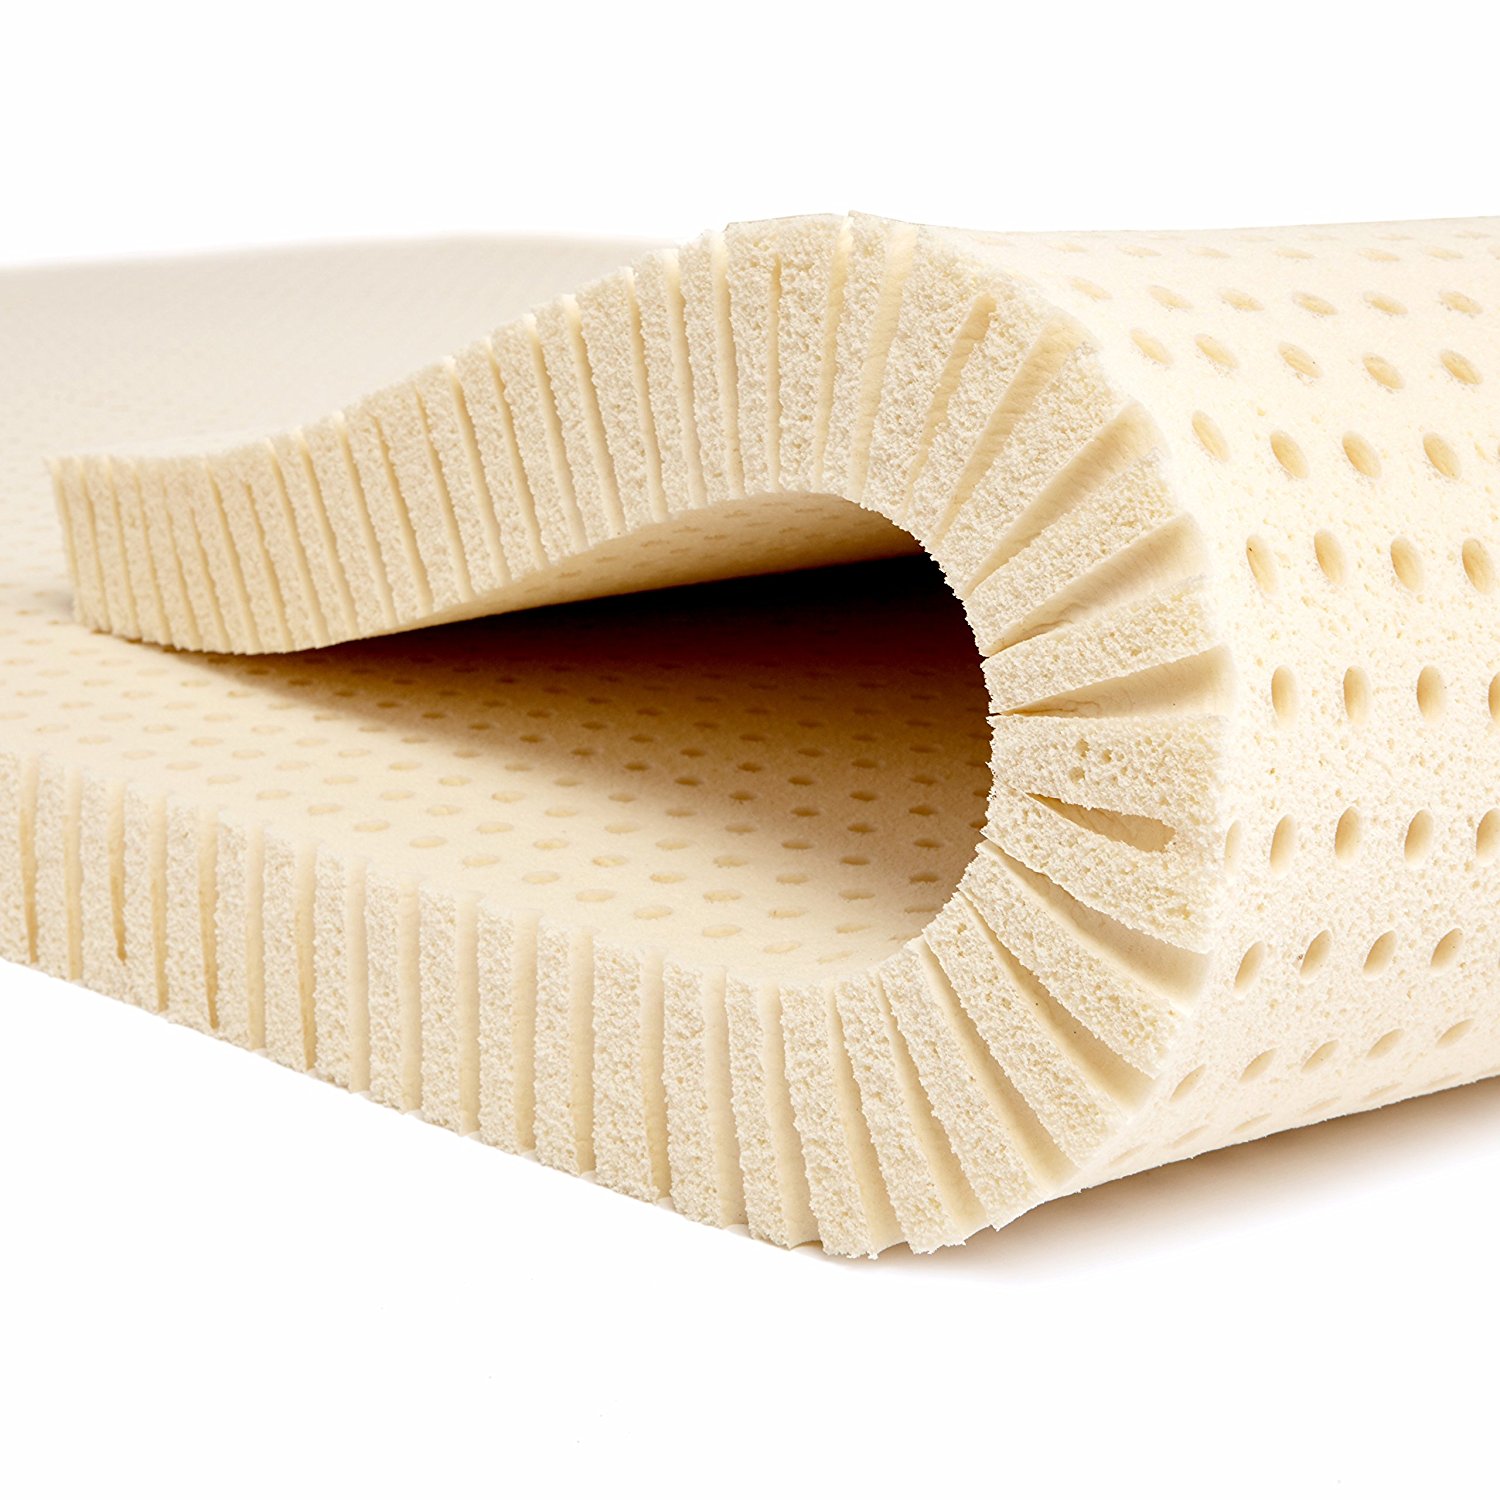 A latex foam comfort layer is non-toxic and isn't prone to sagging like polyurethane foam.